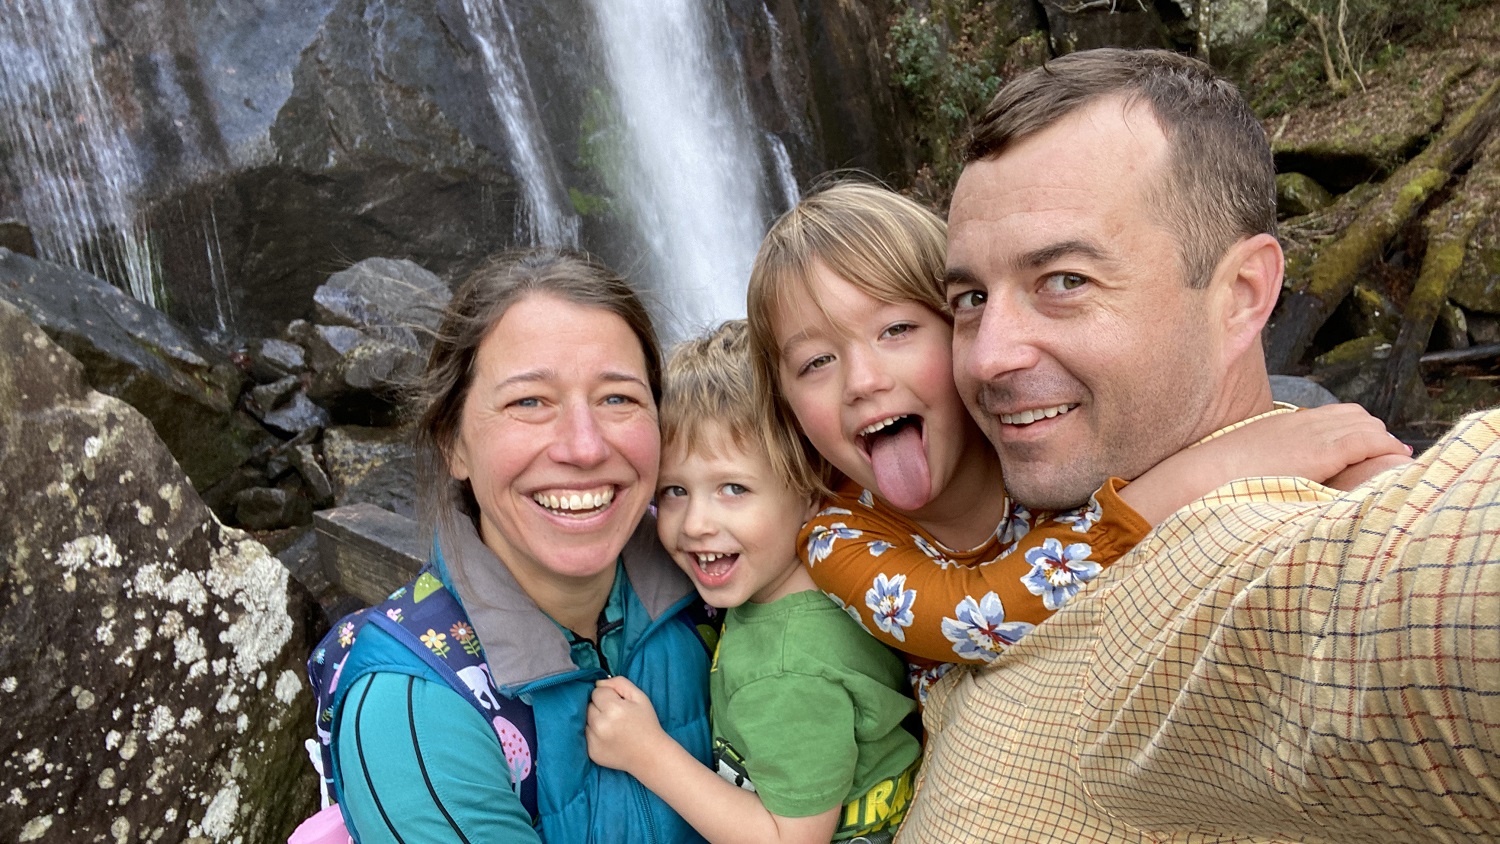 Family Photo near a Waterfall - Faculty Feature: Meet Kathryn Stevenson - Parks, Recreation and Tourism Management at NC State University